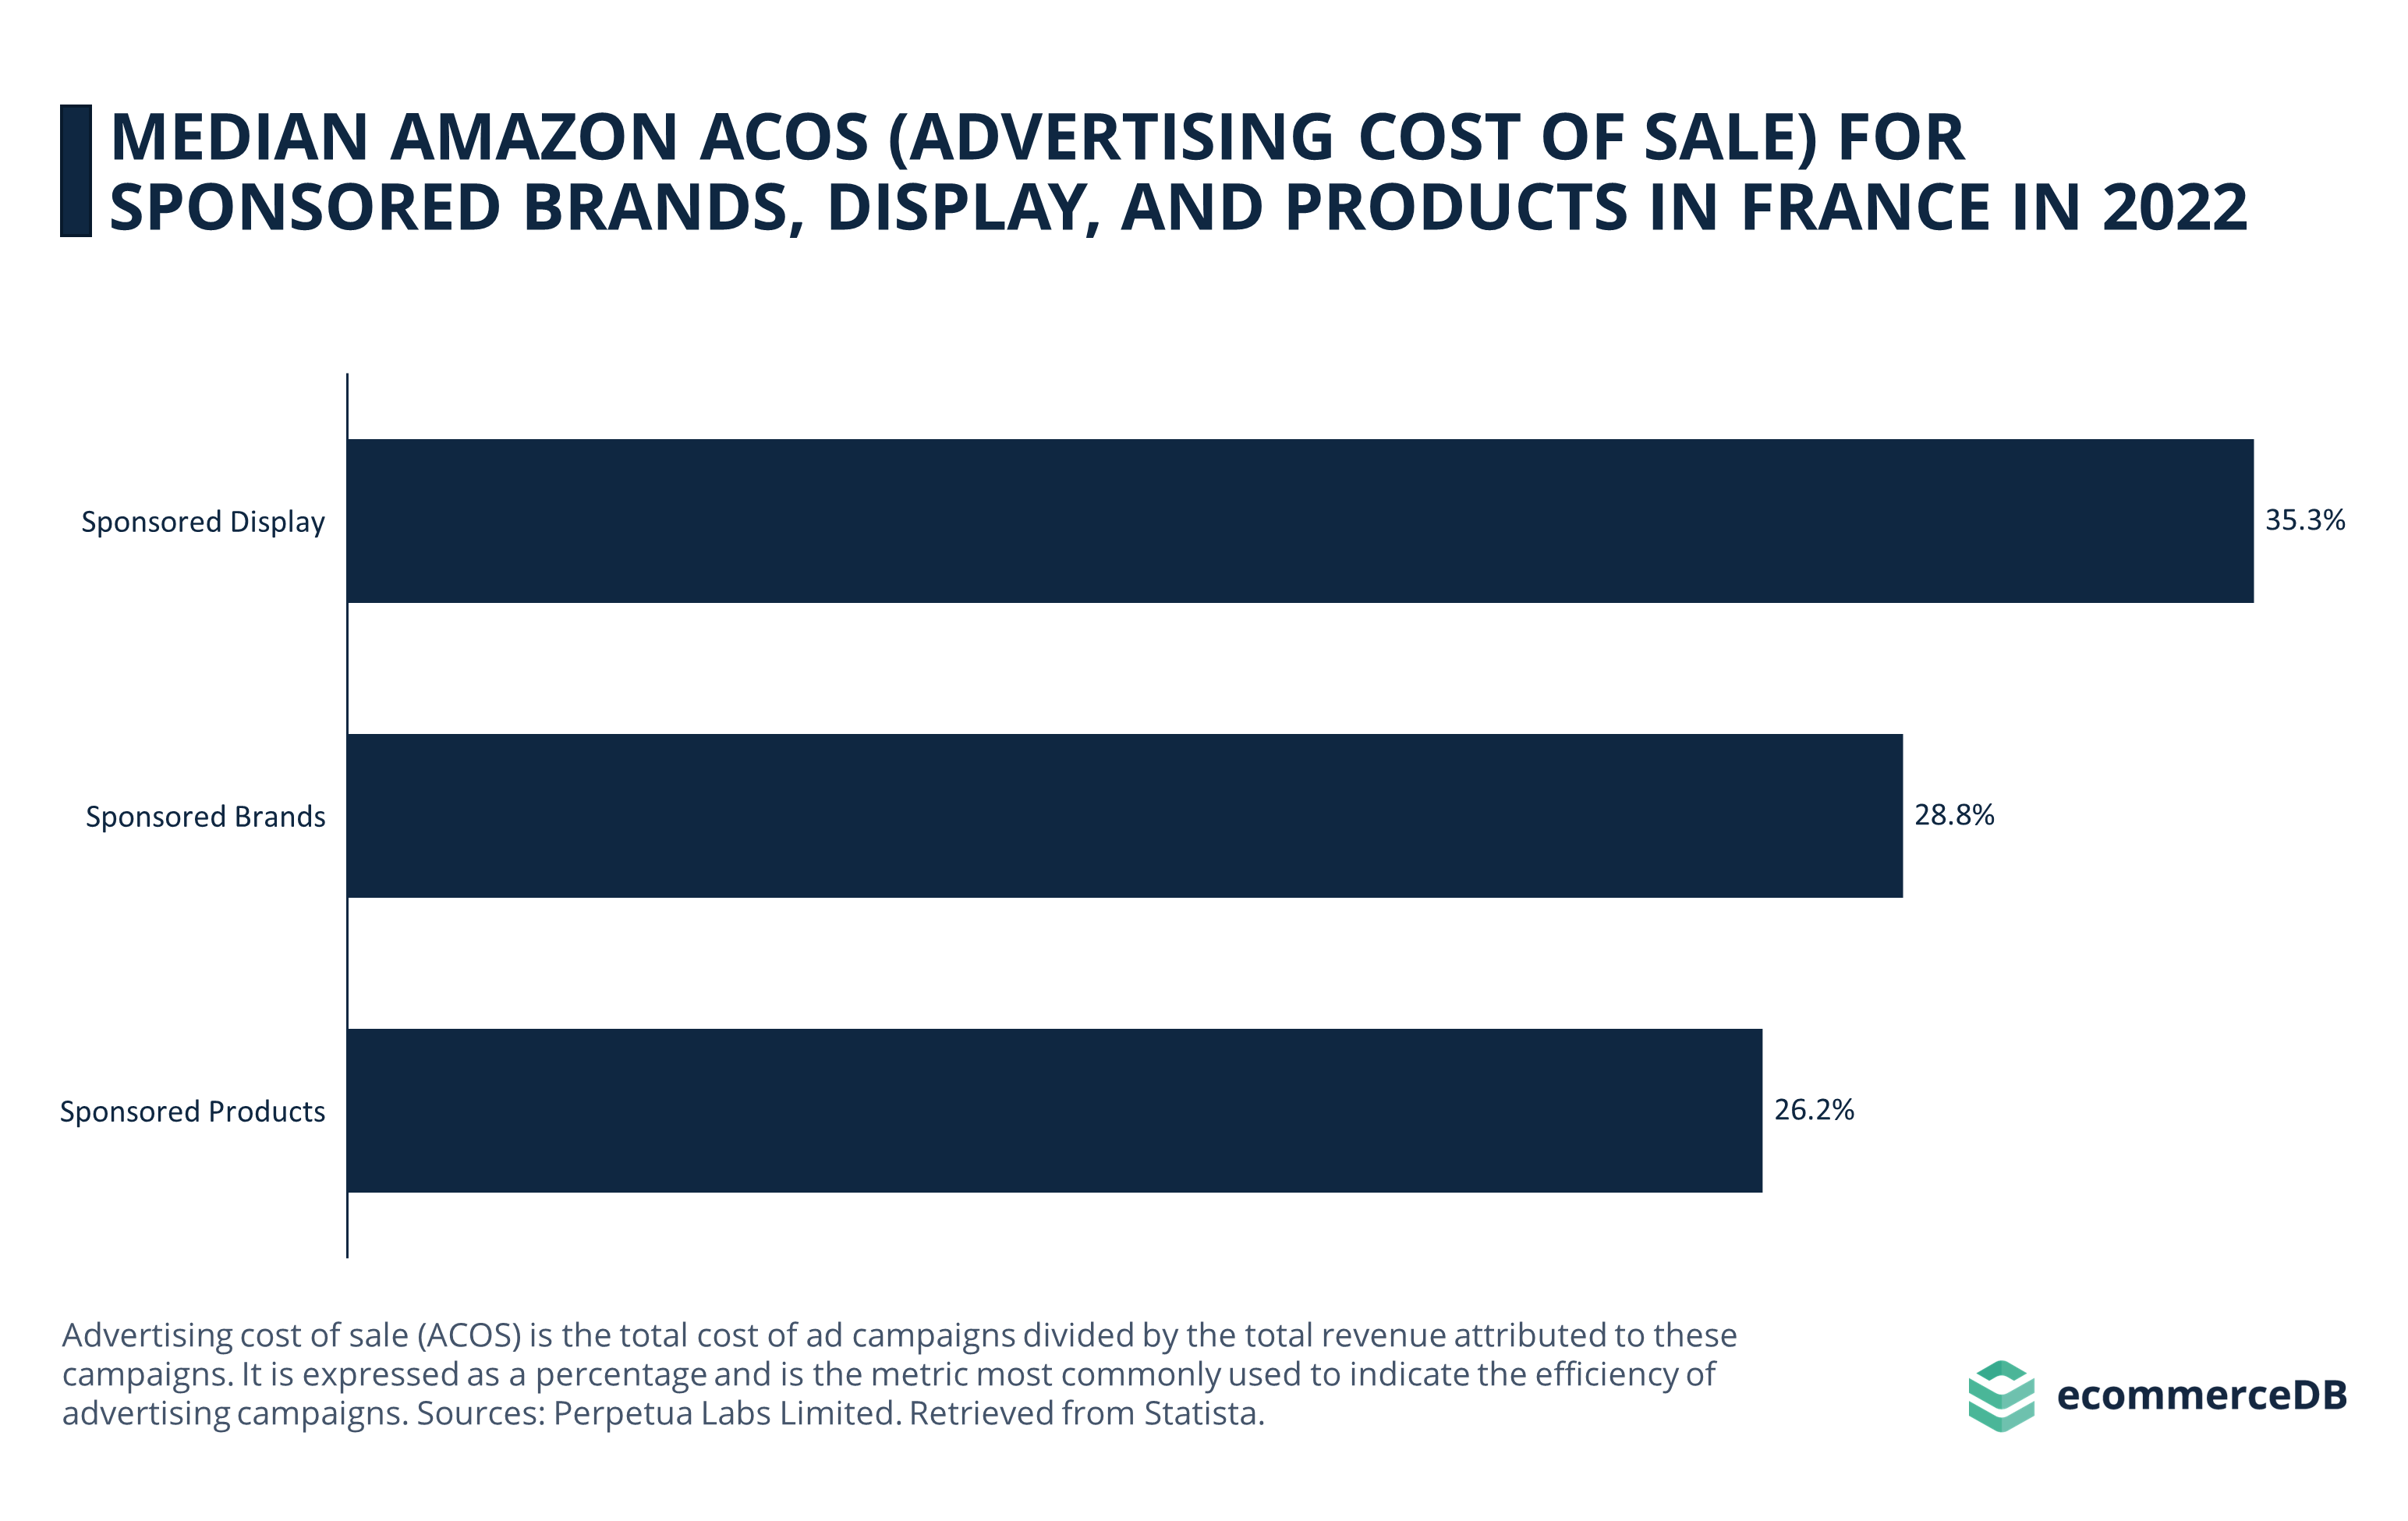 Median Amazon ACOS for 3 Ad Types in France